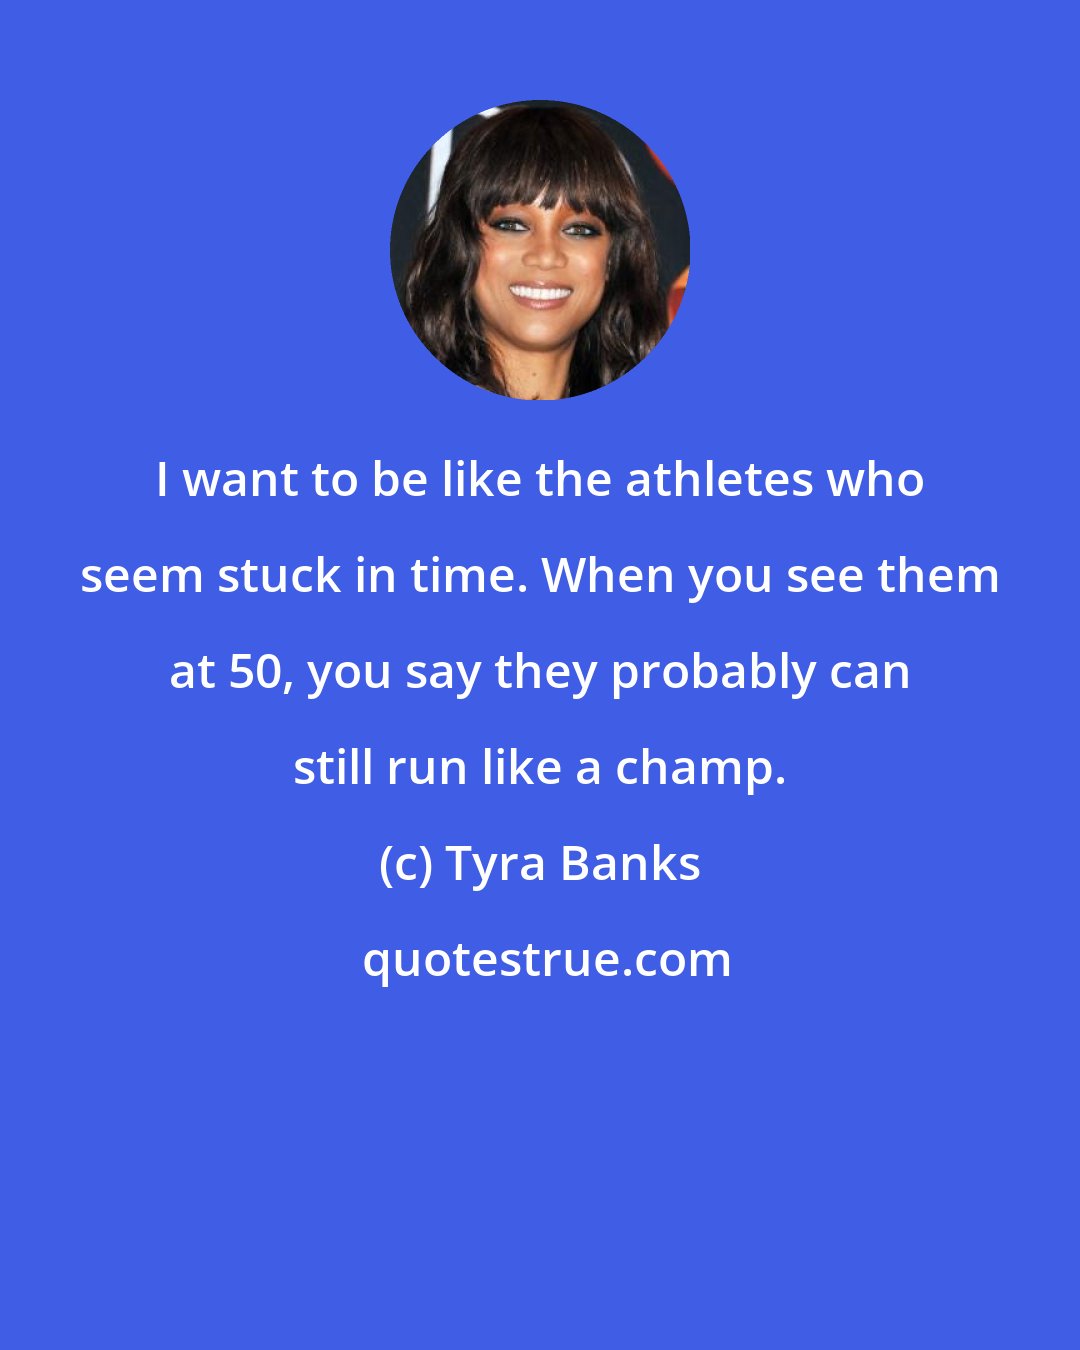 Tyra Banks: I want to be like the athletes who seem stuck in time. When you see them at 50, you say they probably can still run like a champ.